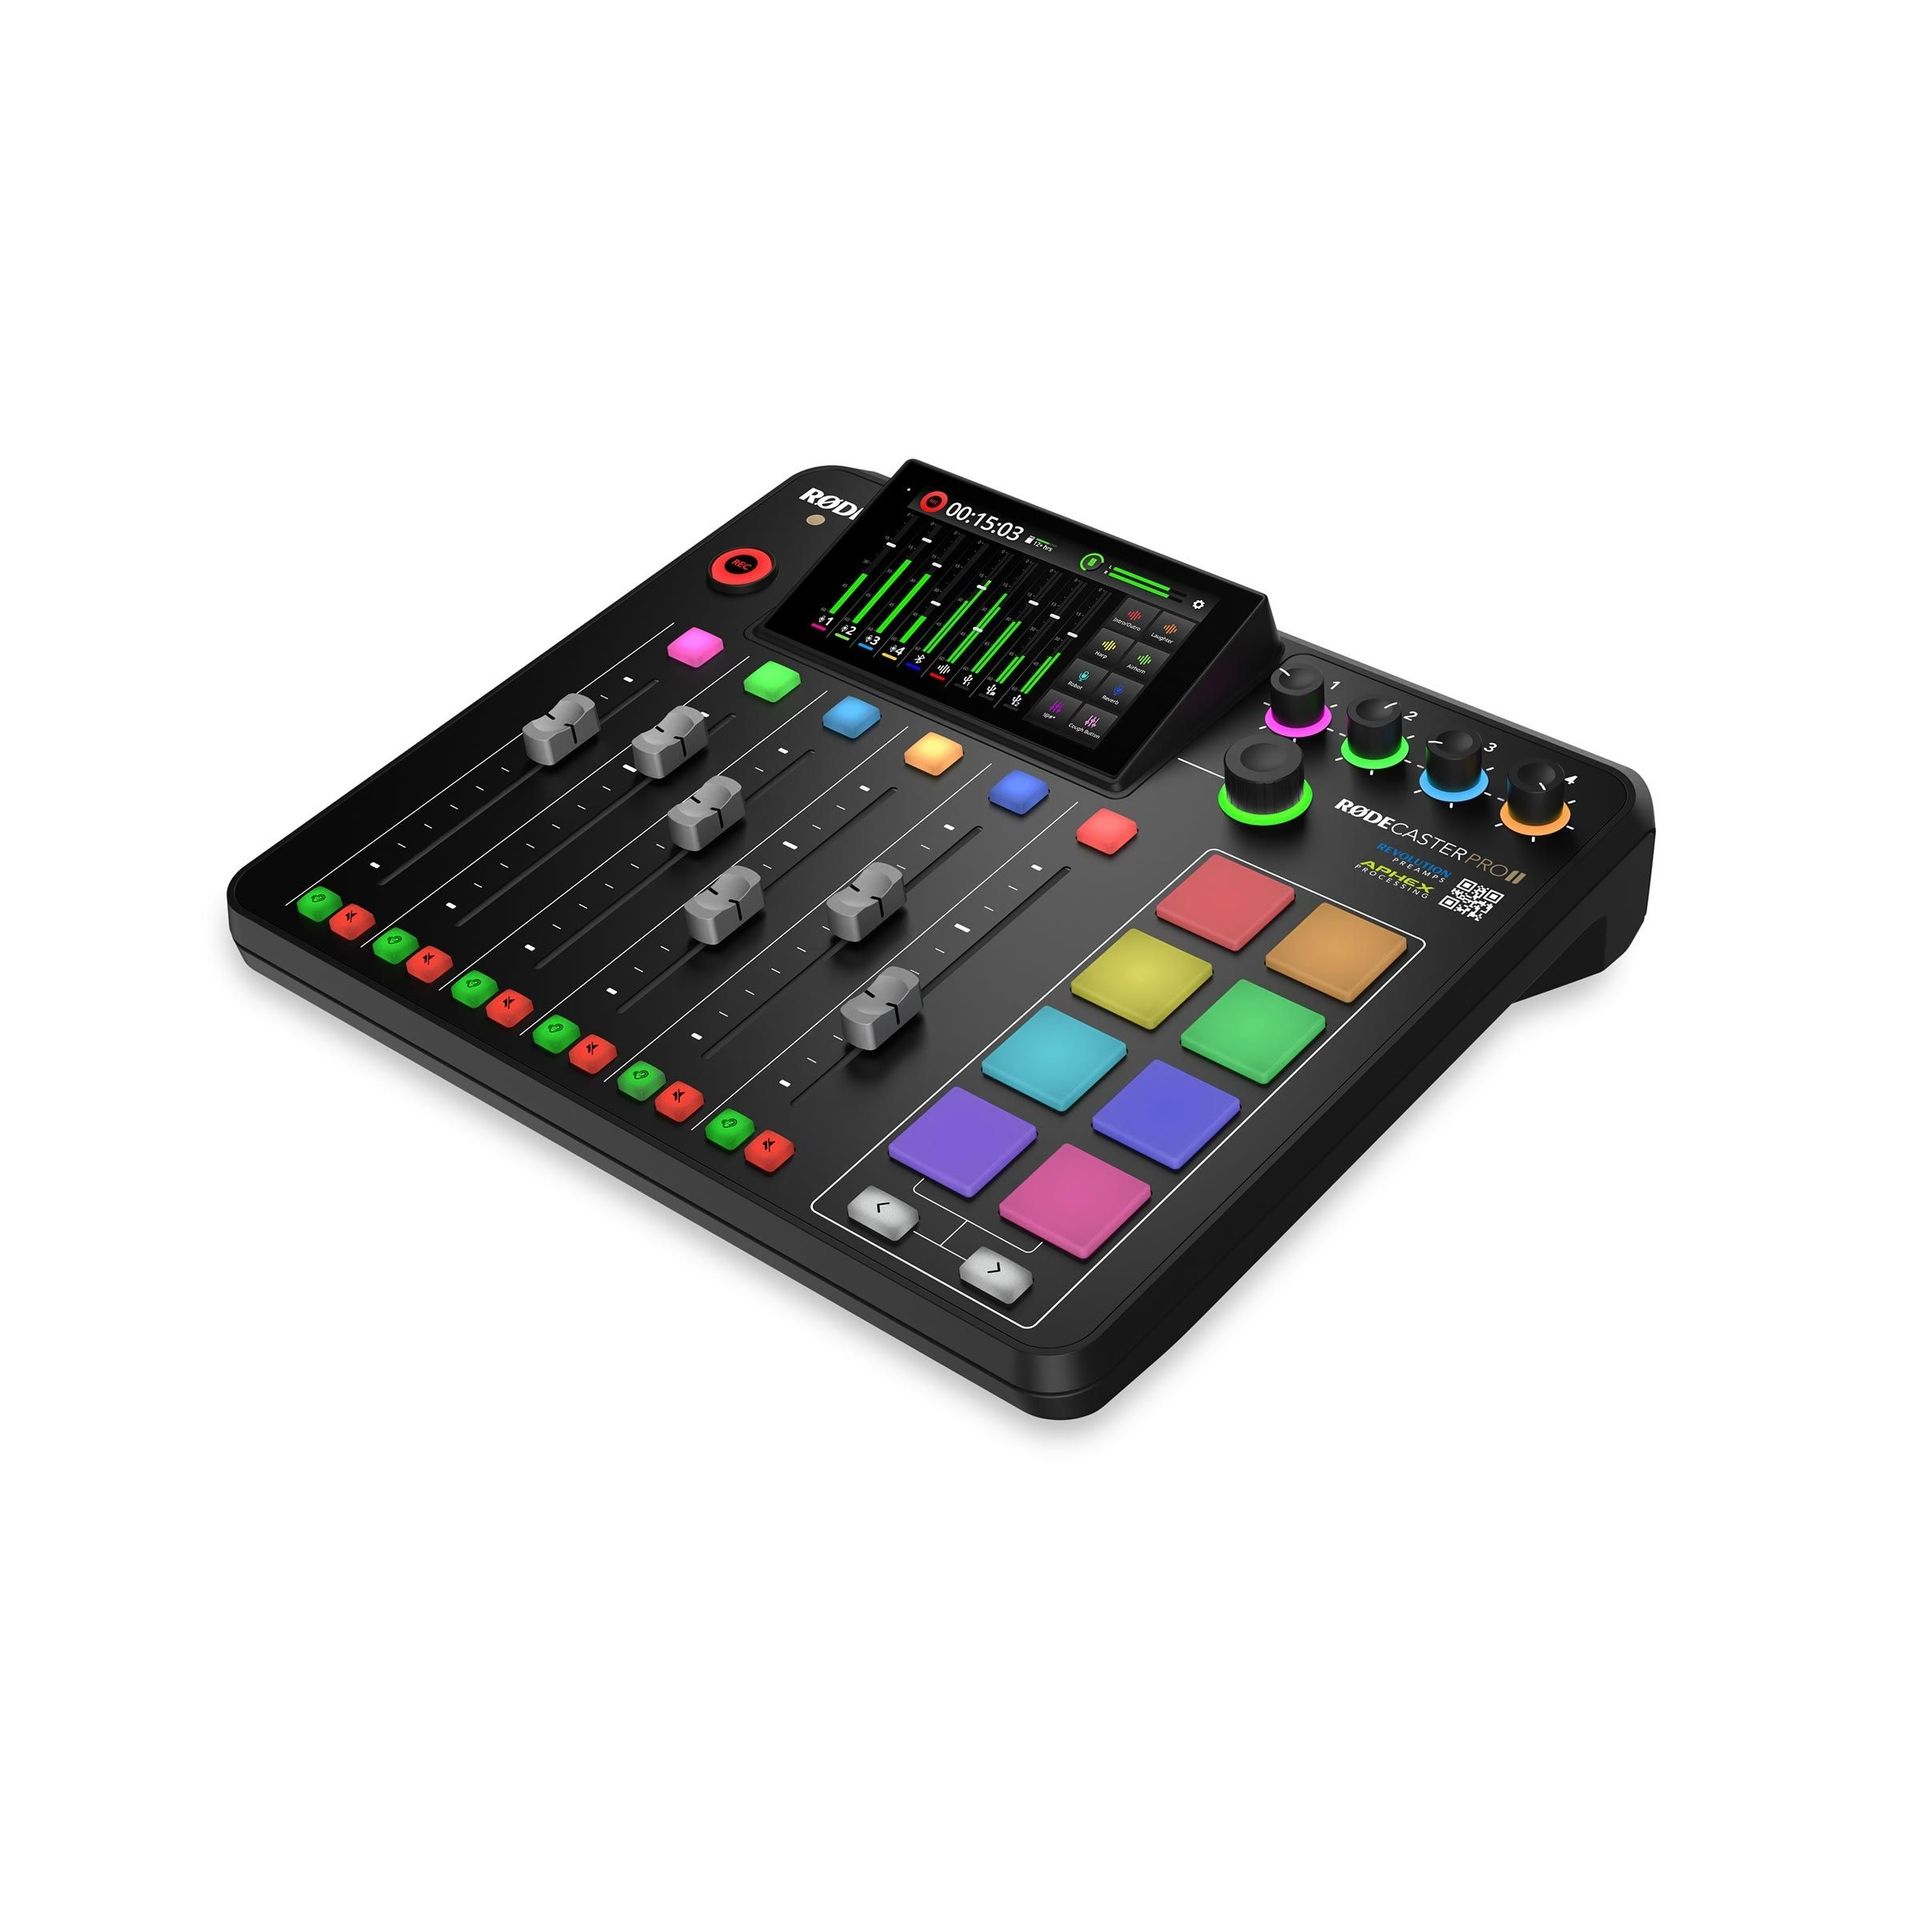 Rode Rodecaster Pro ll Audio Production Studio für Podcaster, Streamer, Musiker